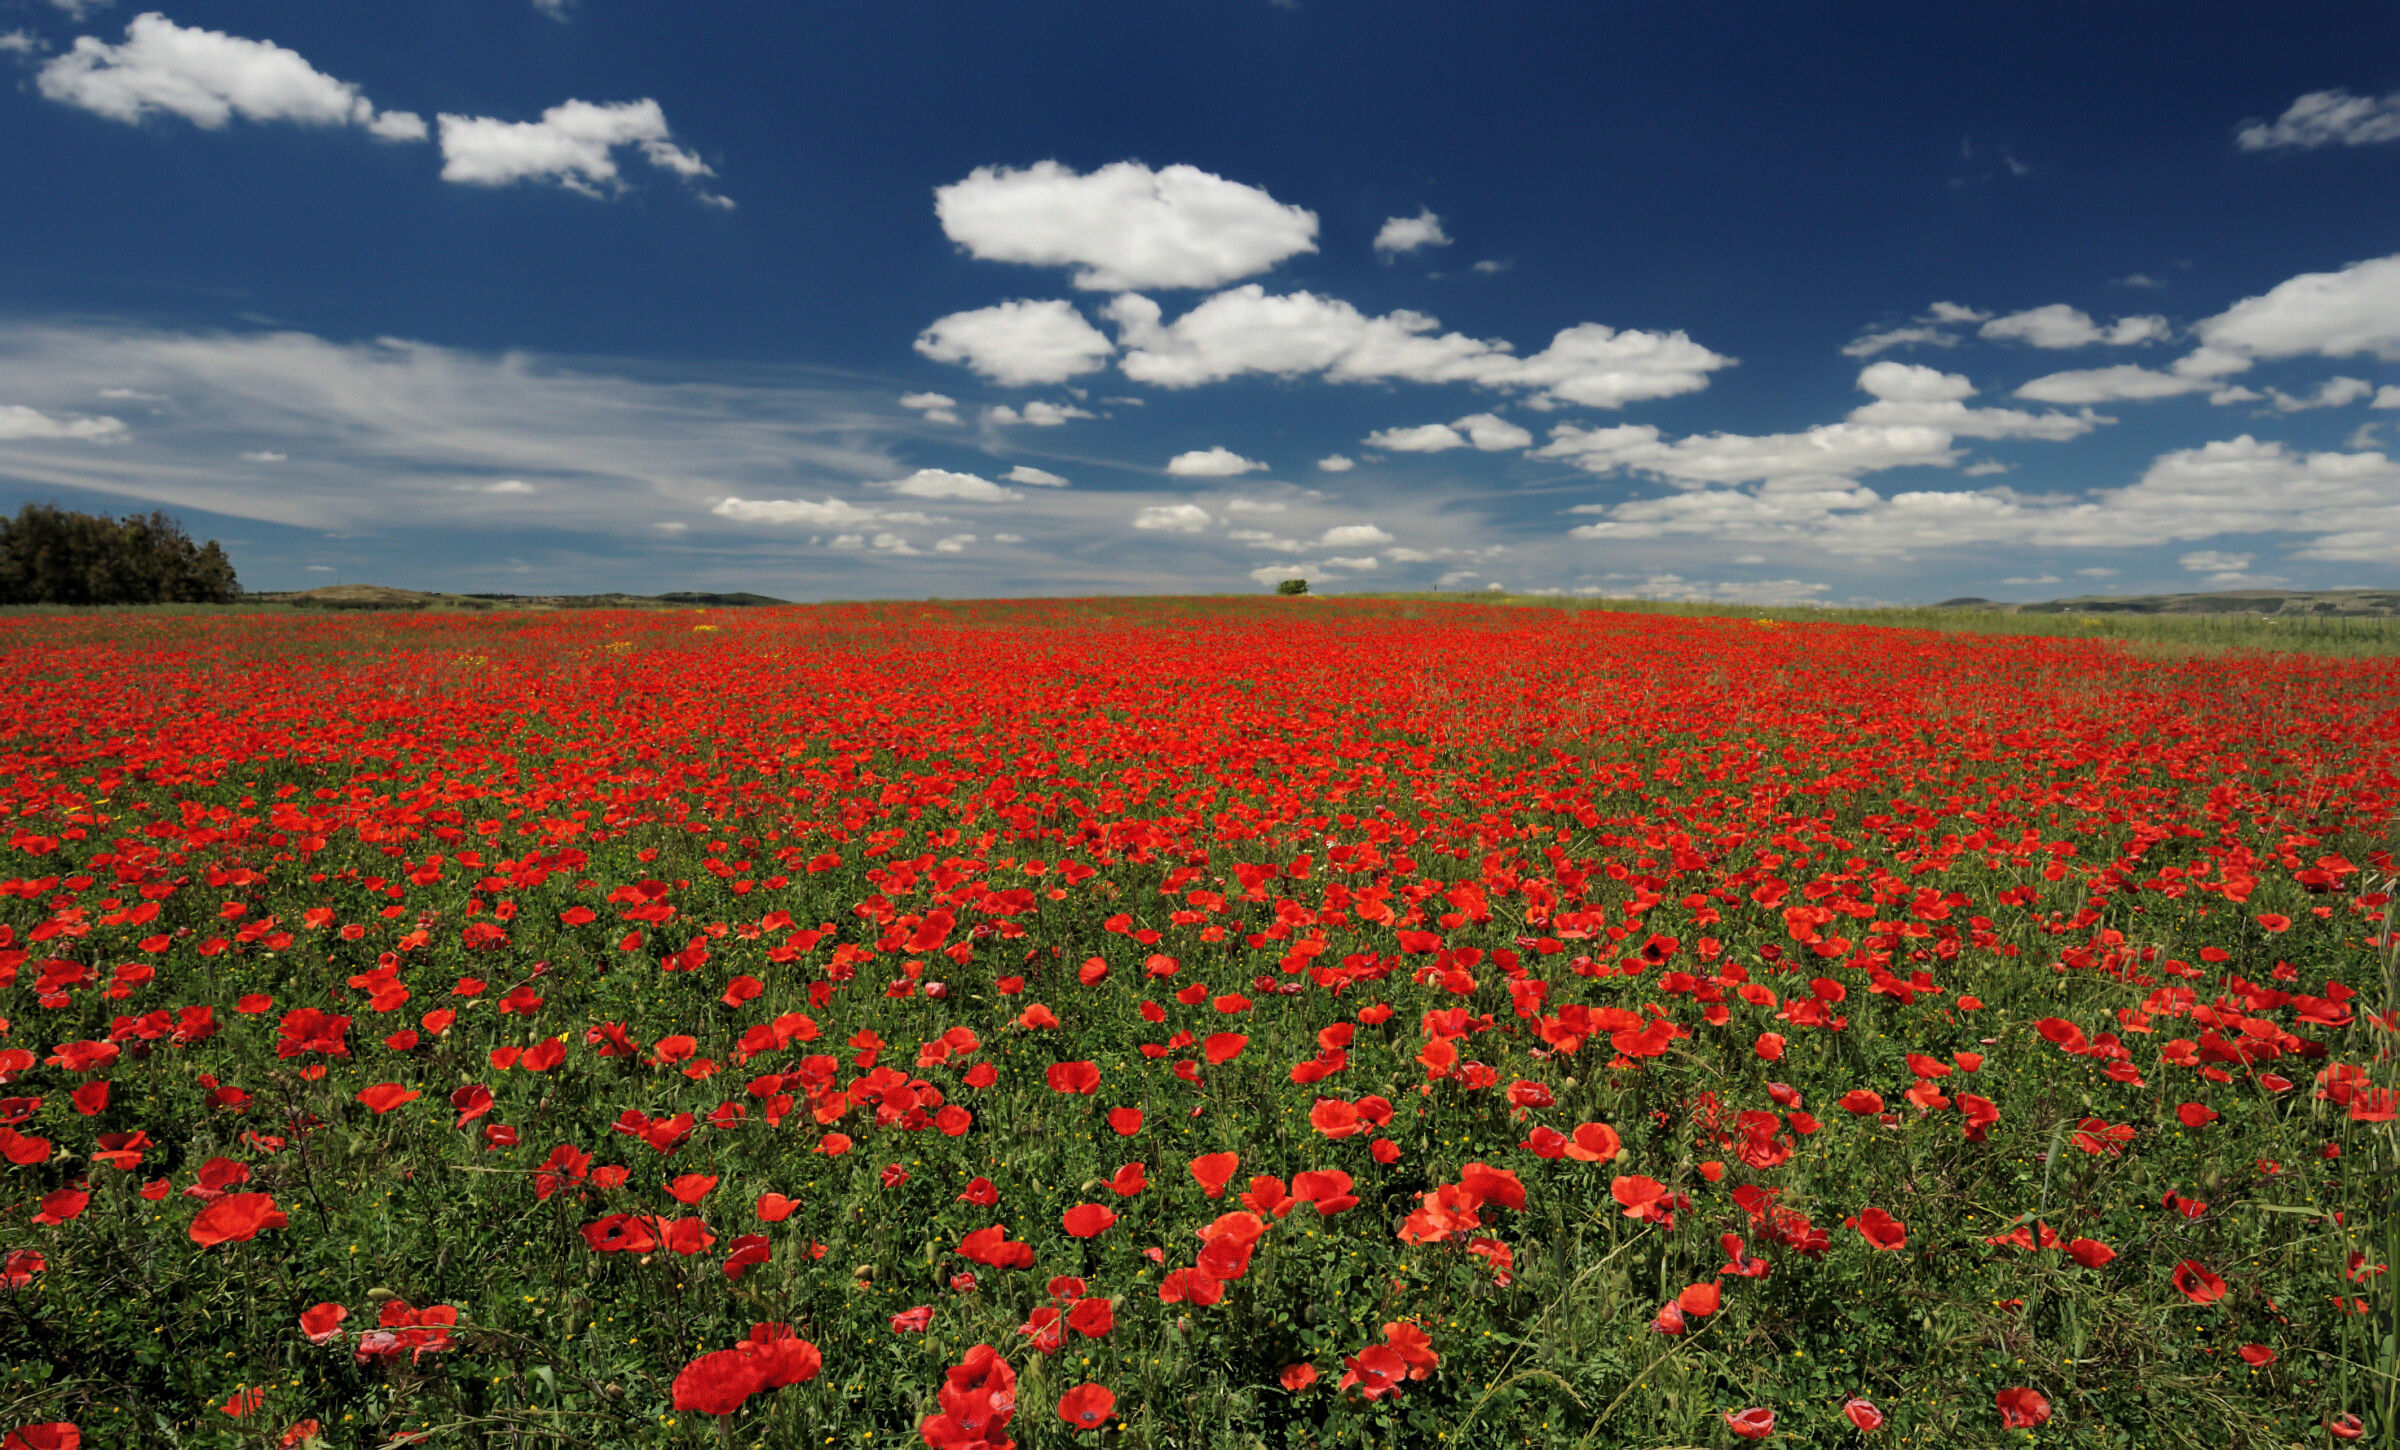 A sea of poppies...